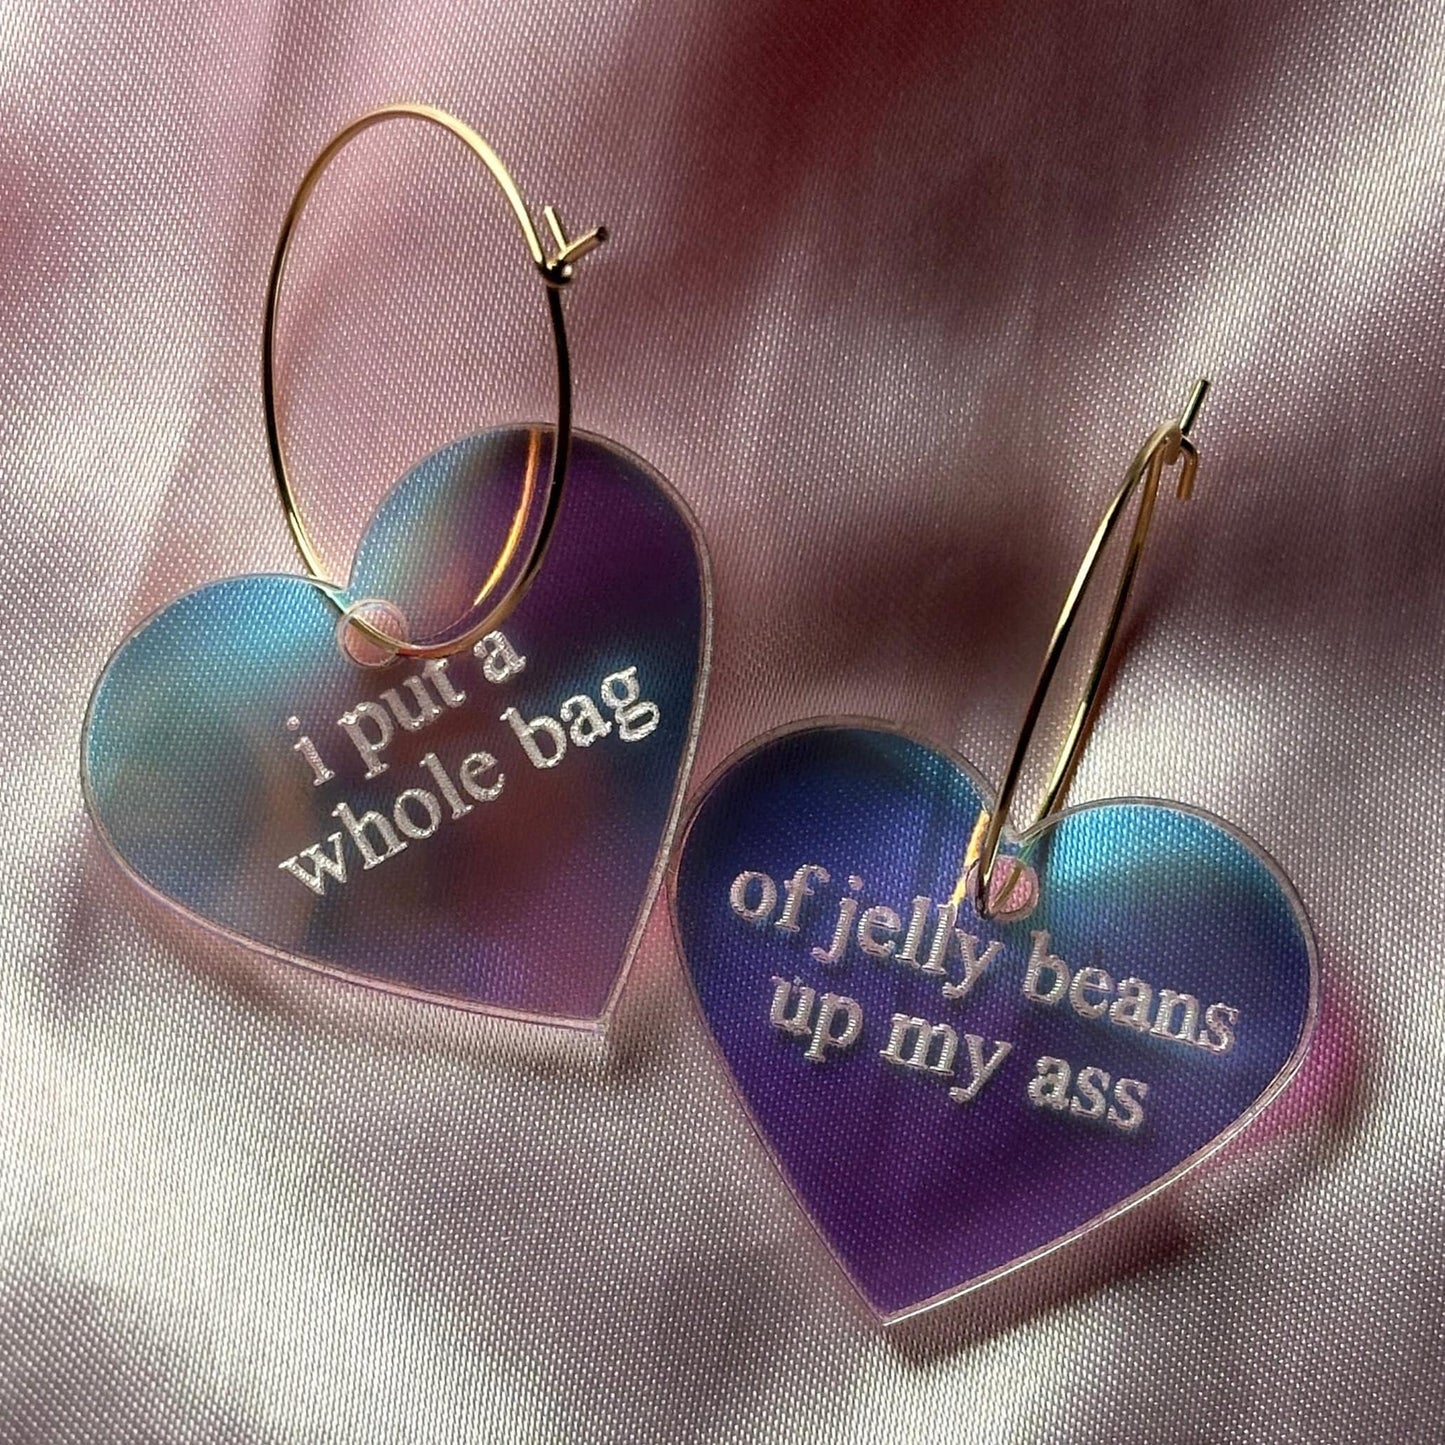 Iridescent I Put A Whole Bag Of Jelly Beans Up My Ass Heart Hoop Earrings